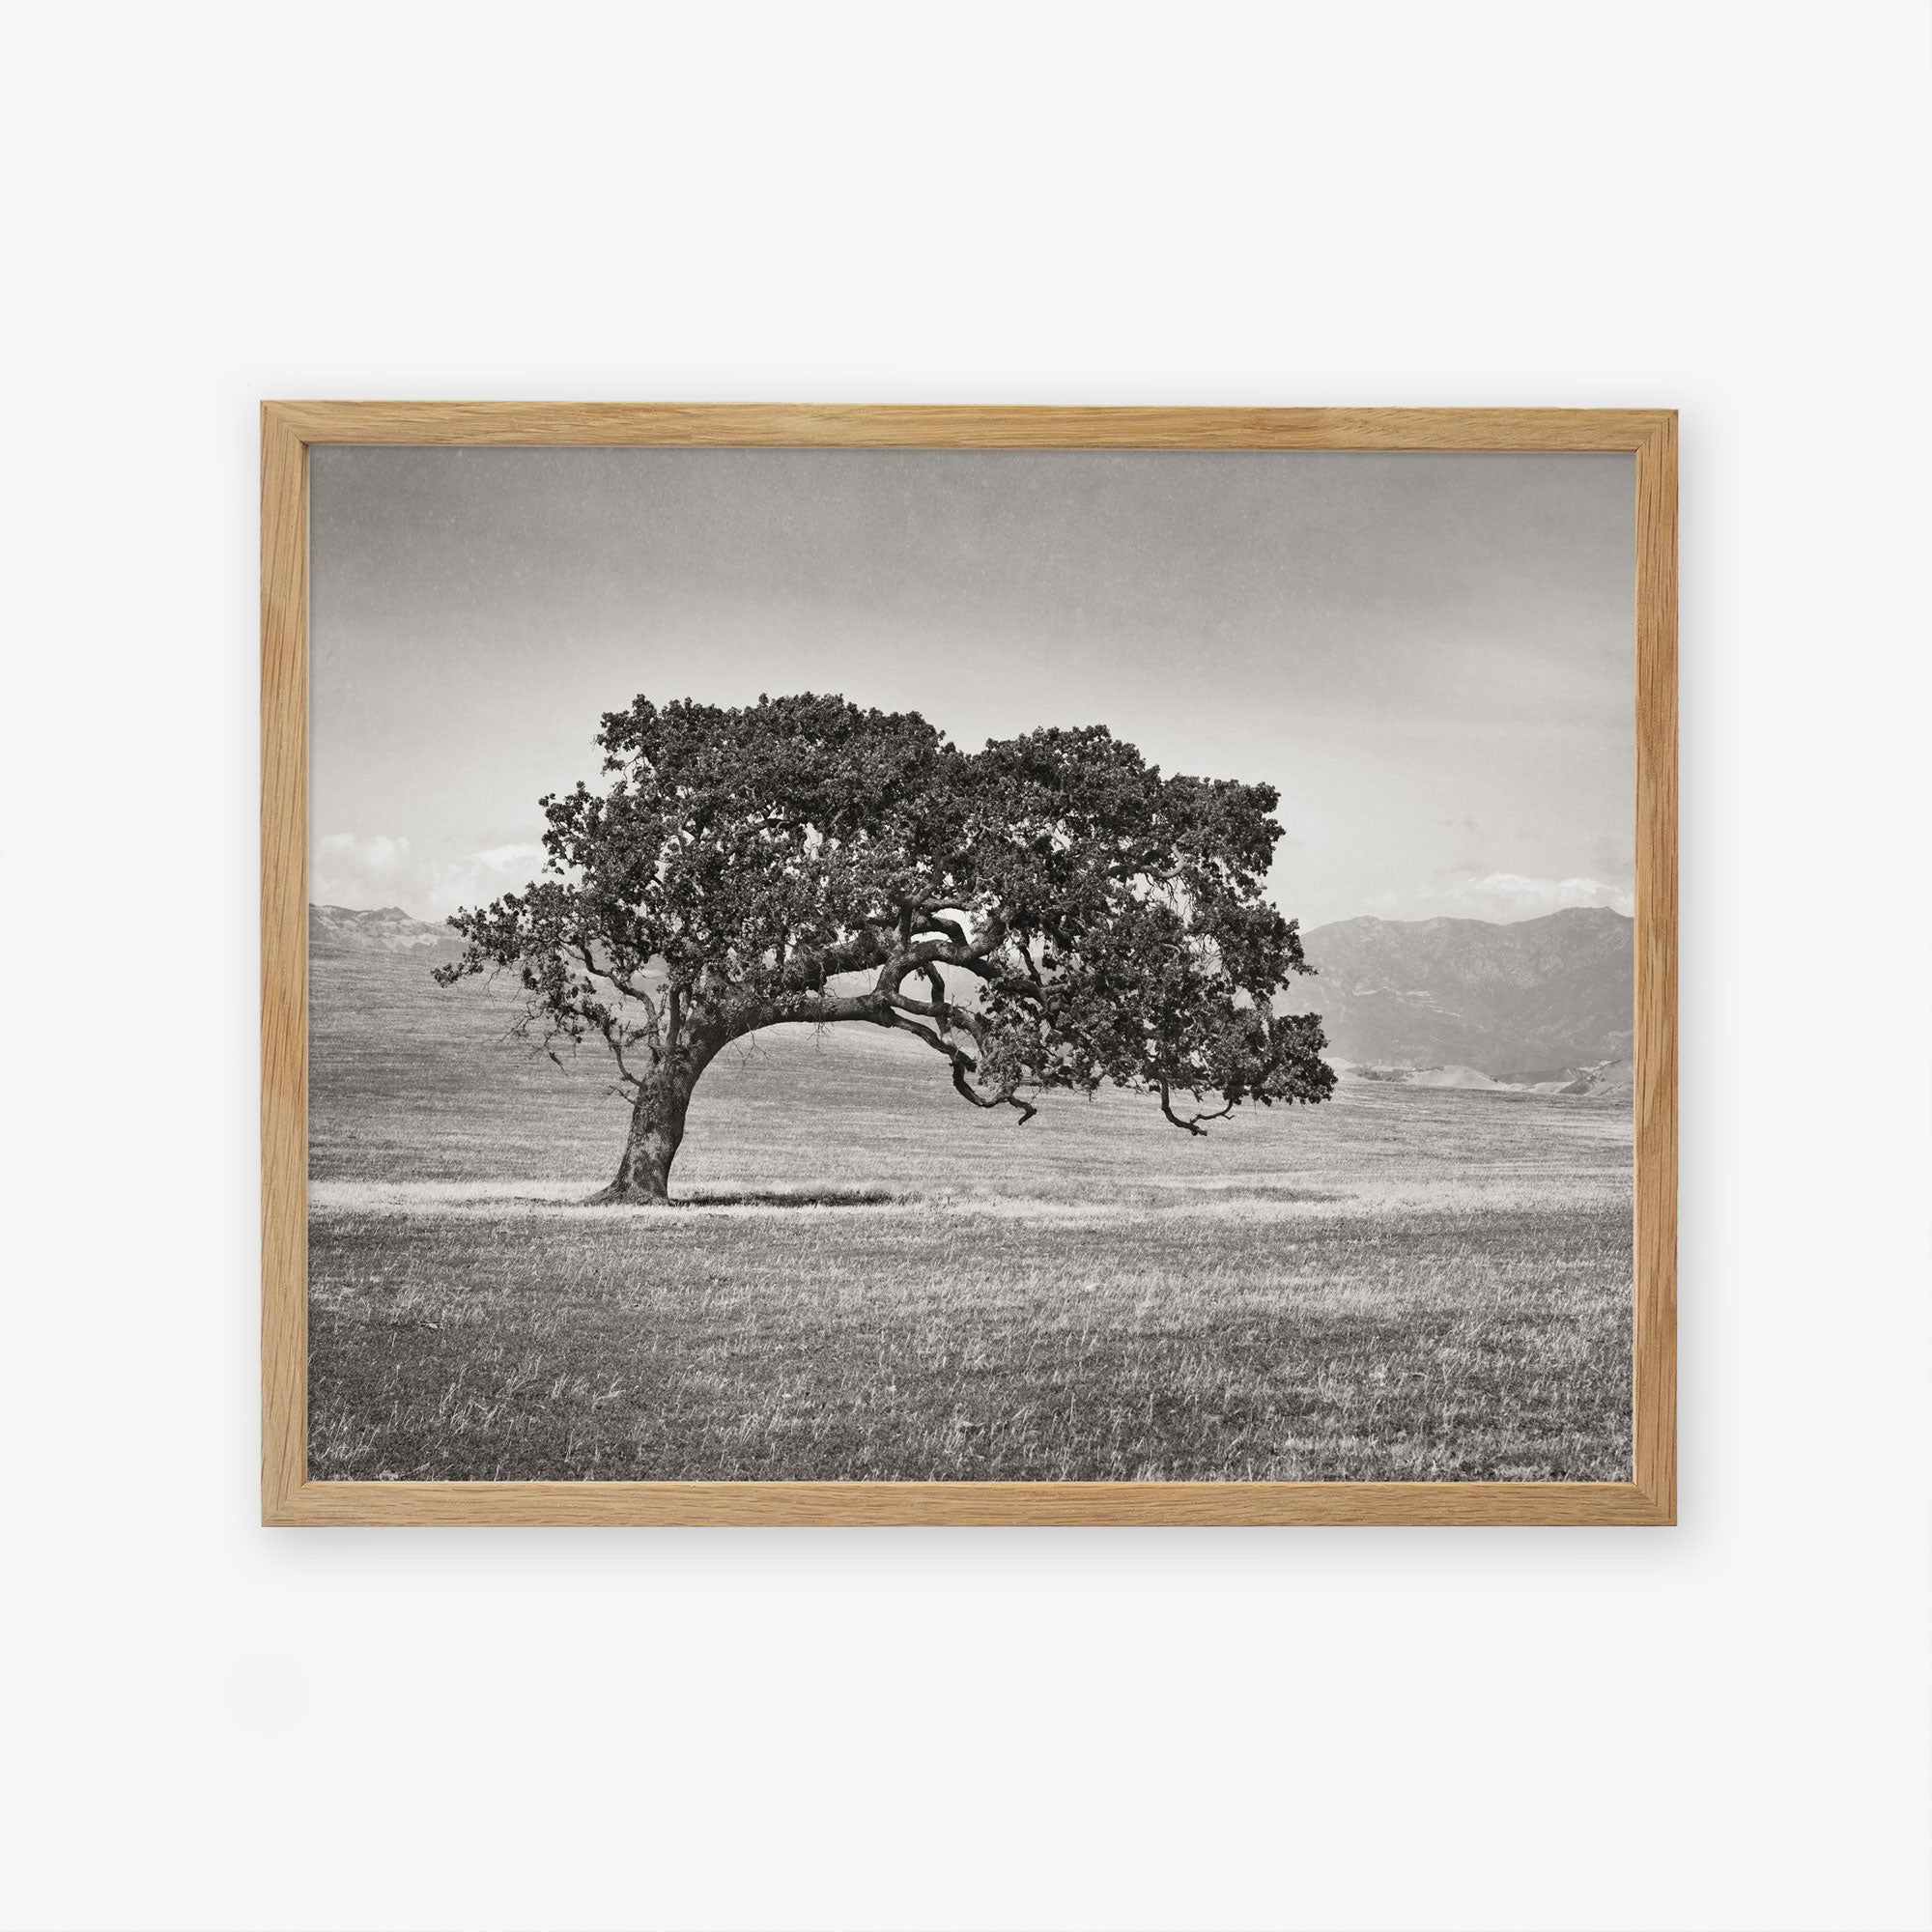 Framed black and white photograph of a Californian Oak Tree Landscape, &#39;Windswept (Black and White)&#39; by Offley Green, with sprawling branches in a grassy field, set against a backdrop of distant mountains.